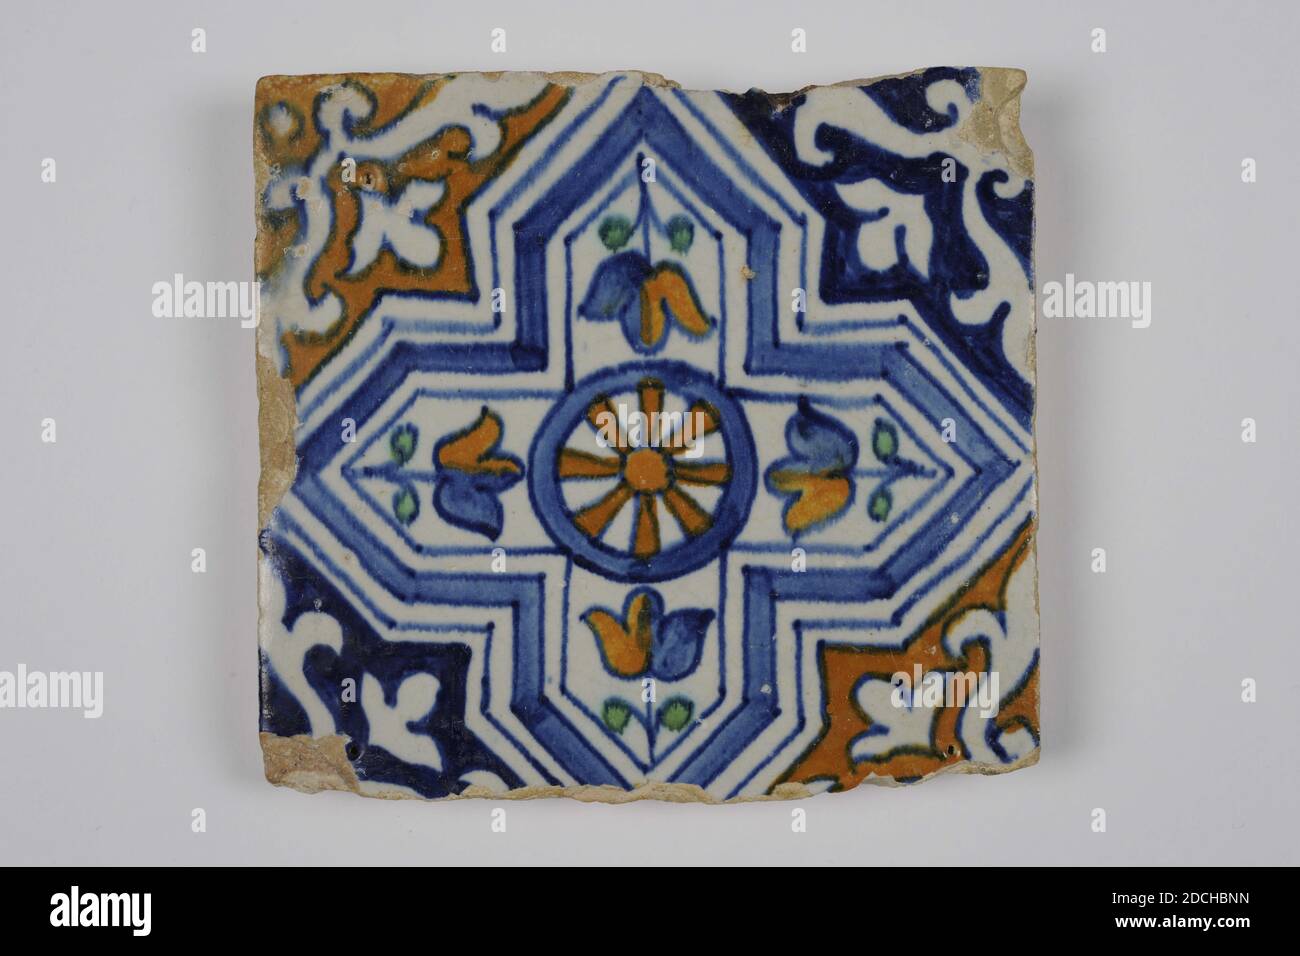 wall tile, Anonymous, c. 1600, tin glaze, earthenware, General: 12.5 x 13.3 x 1.8cm (125 x 133 x 18mm), wheel, tulip, Northern Netherlands, Ornament tile of earthenware covered with tin glaze. Multicolored painted in blue, orange brown and green with a stylized geometric image. The image consists of a straight pointed arch with squared corners. In the center an eight-spoke wheel surrounded by four inwardly directed tulips, 1985 Stock Photo